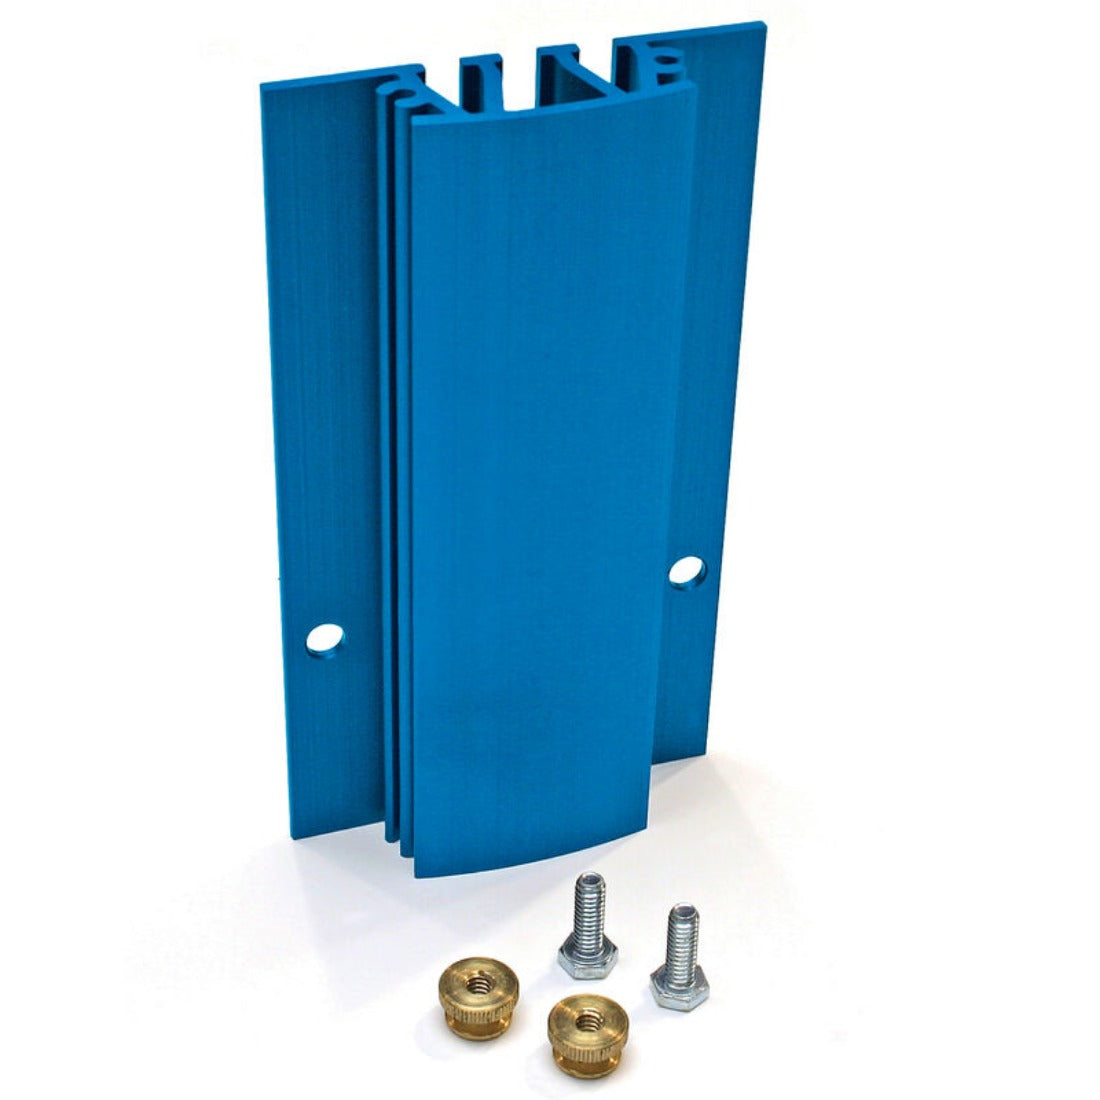 Kreg Band Saw 7 inch (178mm) Resaw Guide shown with 2 x bolts and 2 x brass thumb screws